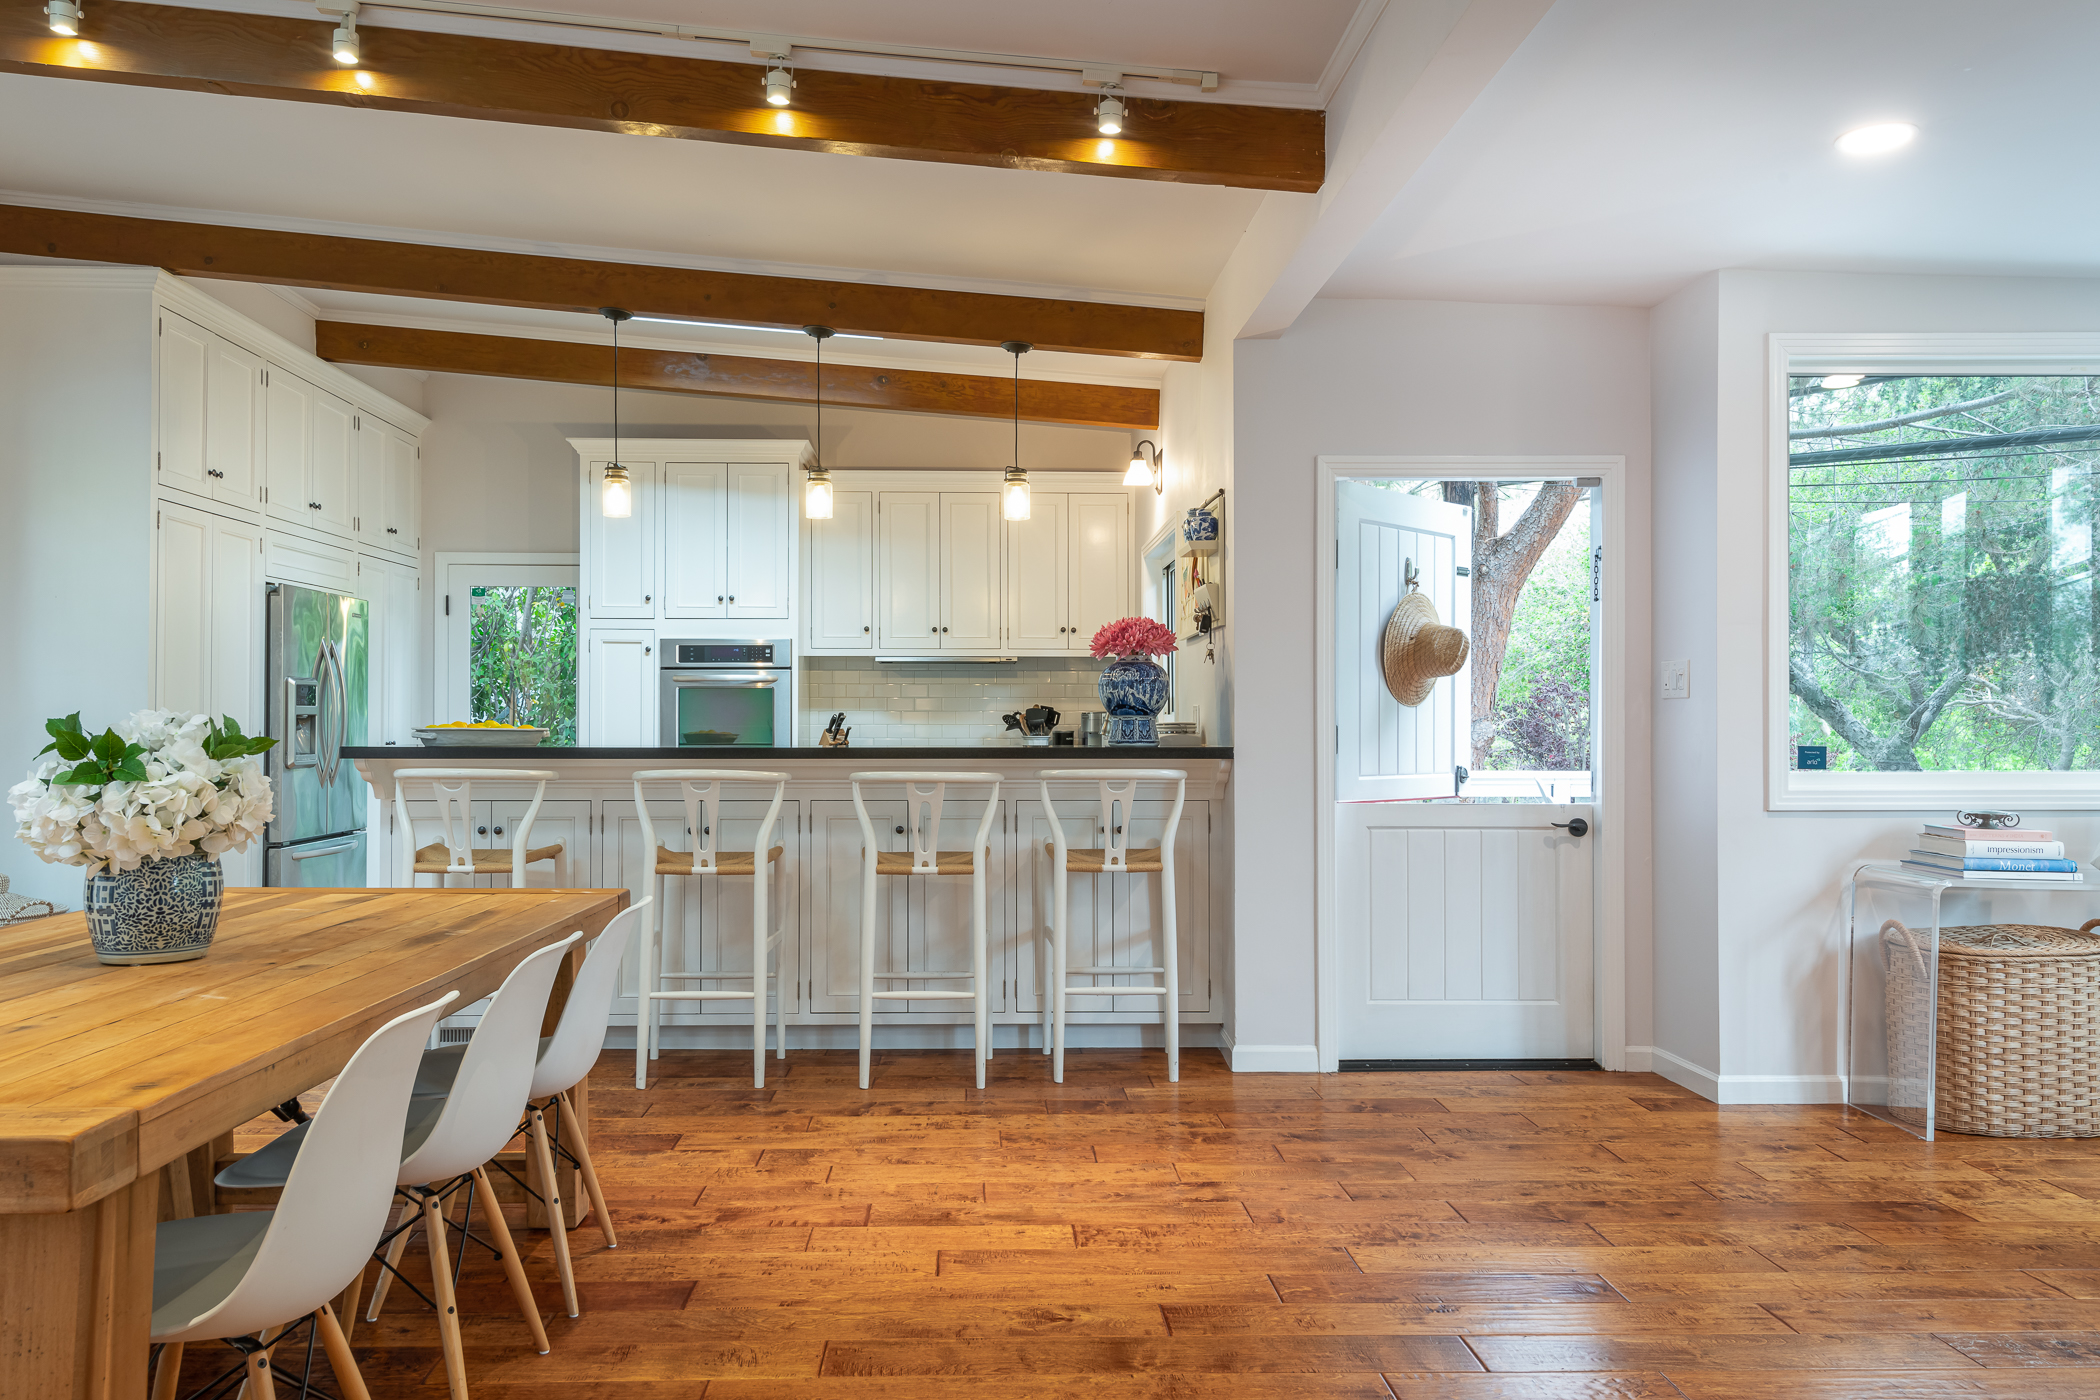 Bright dining room and kitchen with wood exposed beams and hand hewn floor